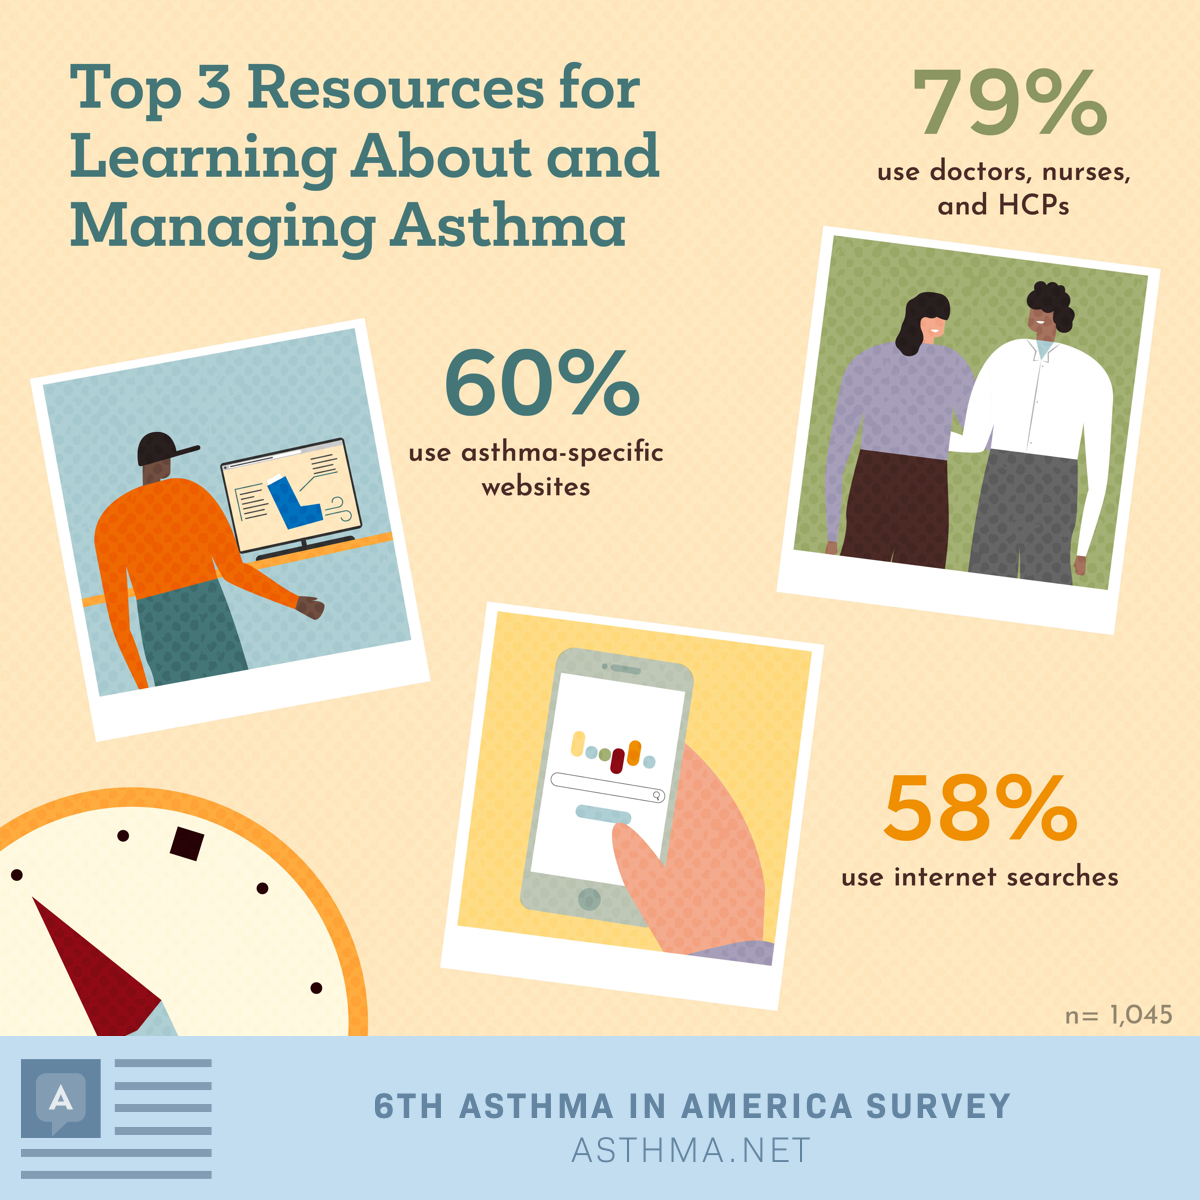 Top 3 resources for learning about and managing asthma included 79% using doctors/HCP/nurses, 60% using asthma-specific websites, and 58% using internet searches.